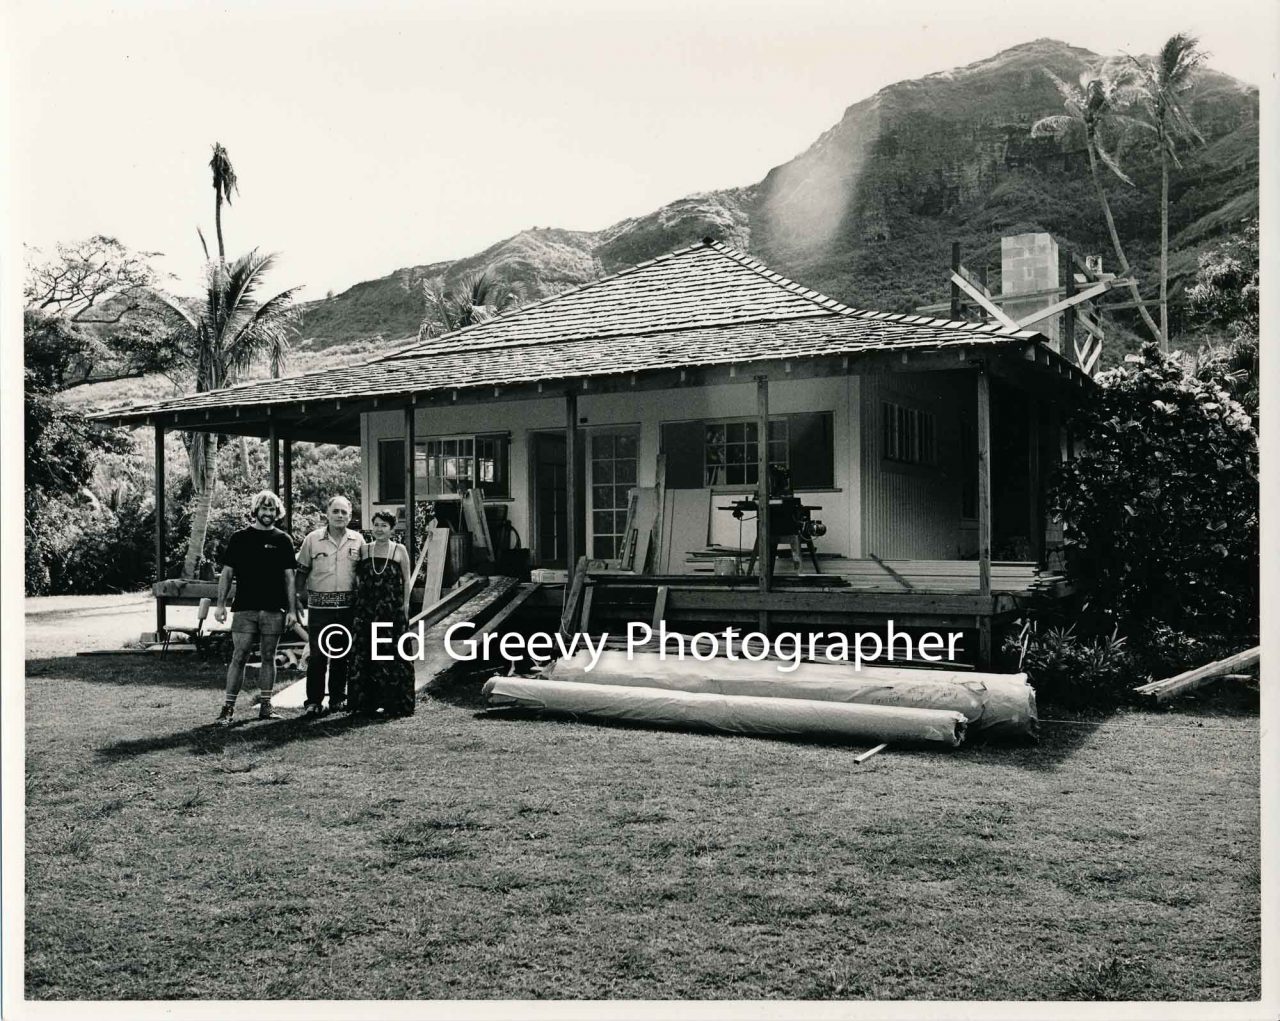 Stanford and June Achi at their Niumalu-Nawiliwili home, repaired after Hurricane Iwa damage. With them is the Oregon carpenter who helped restore their home. (7 December 1983) Negative: 6021-1-4 | Ed Greevy Photographer